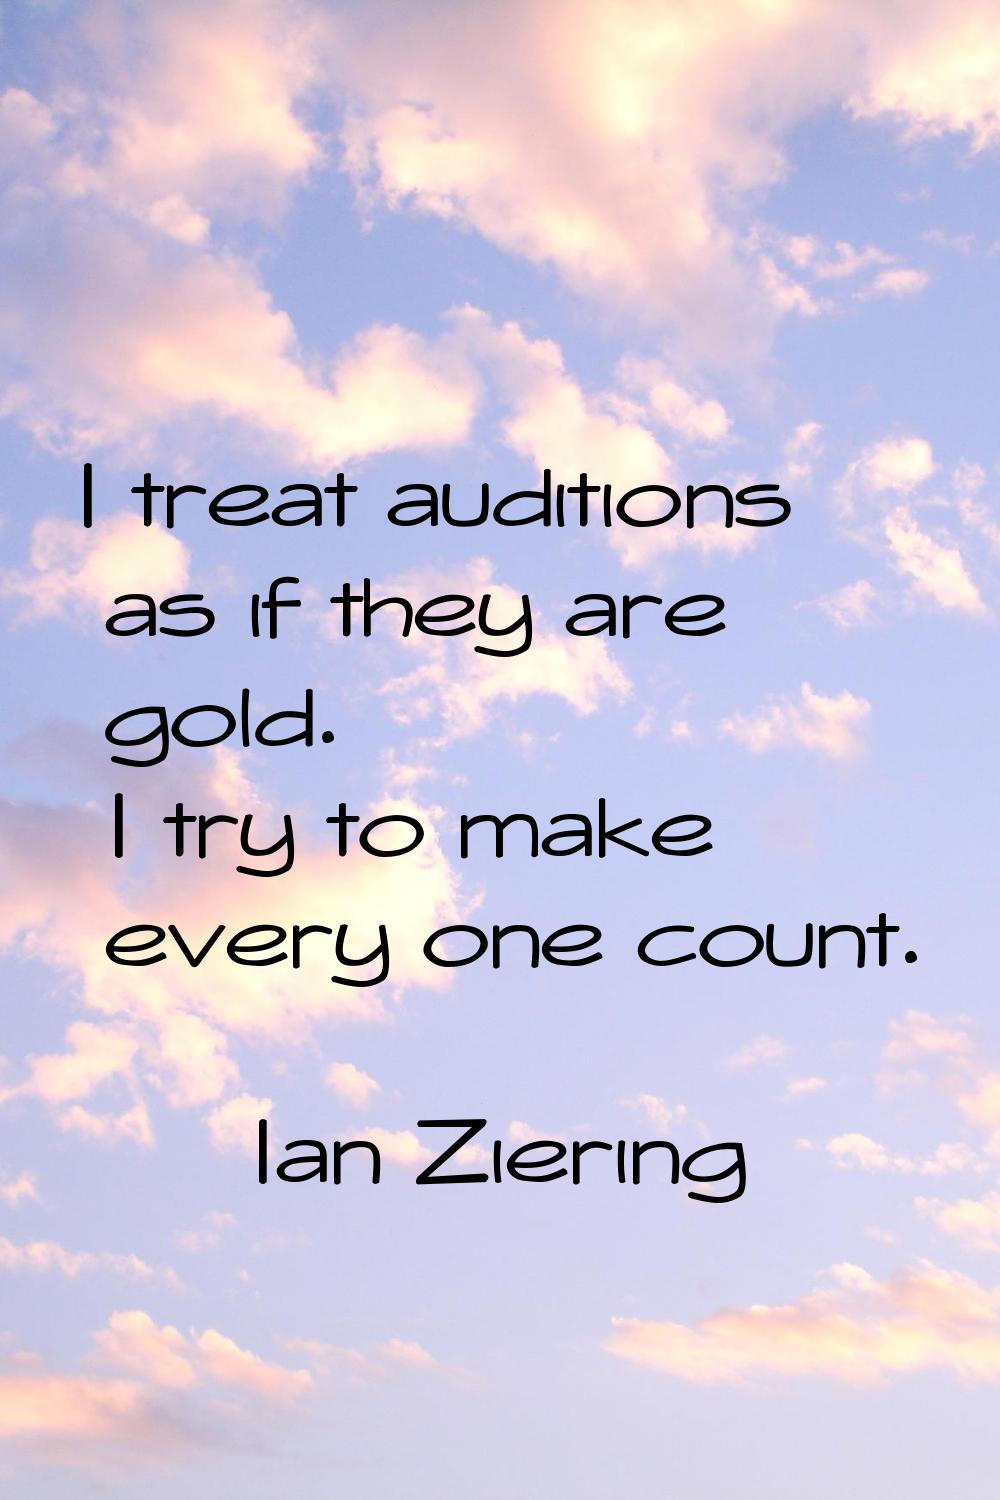 I treat auditions as if they are gold. I try to make every one count.